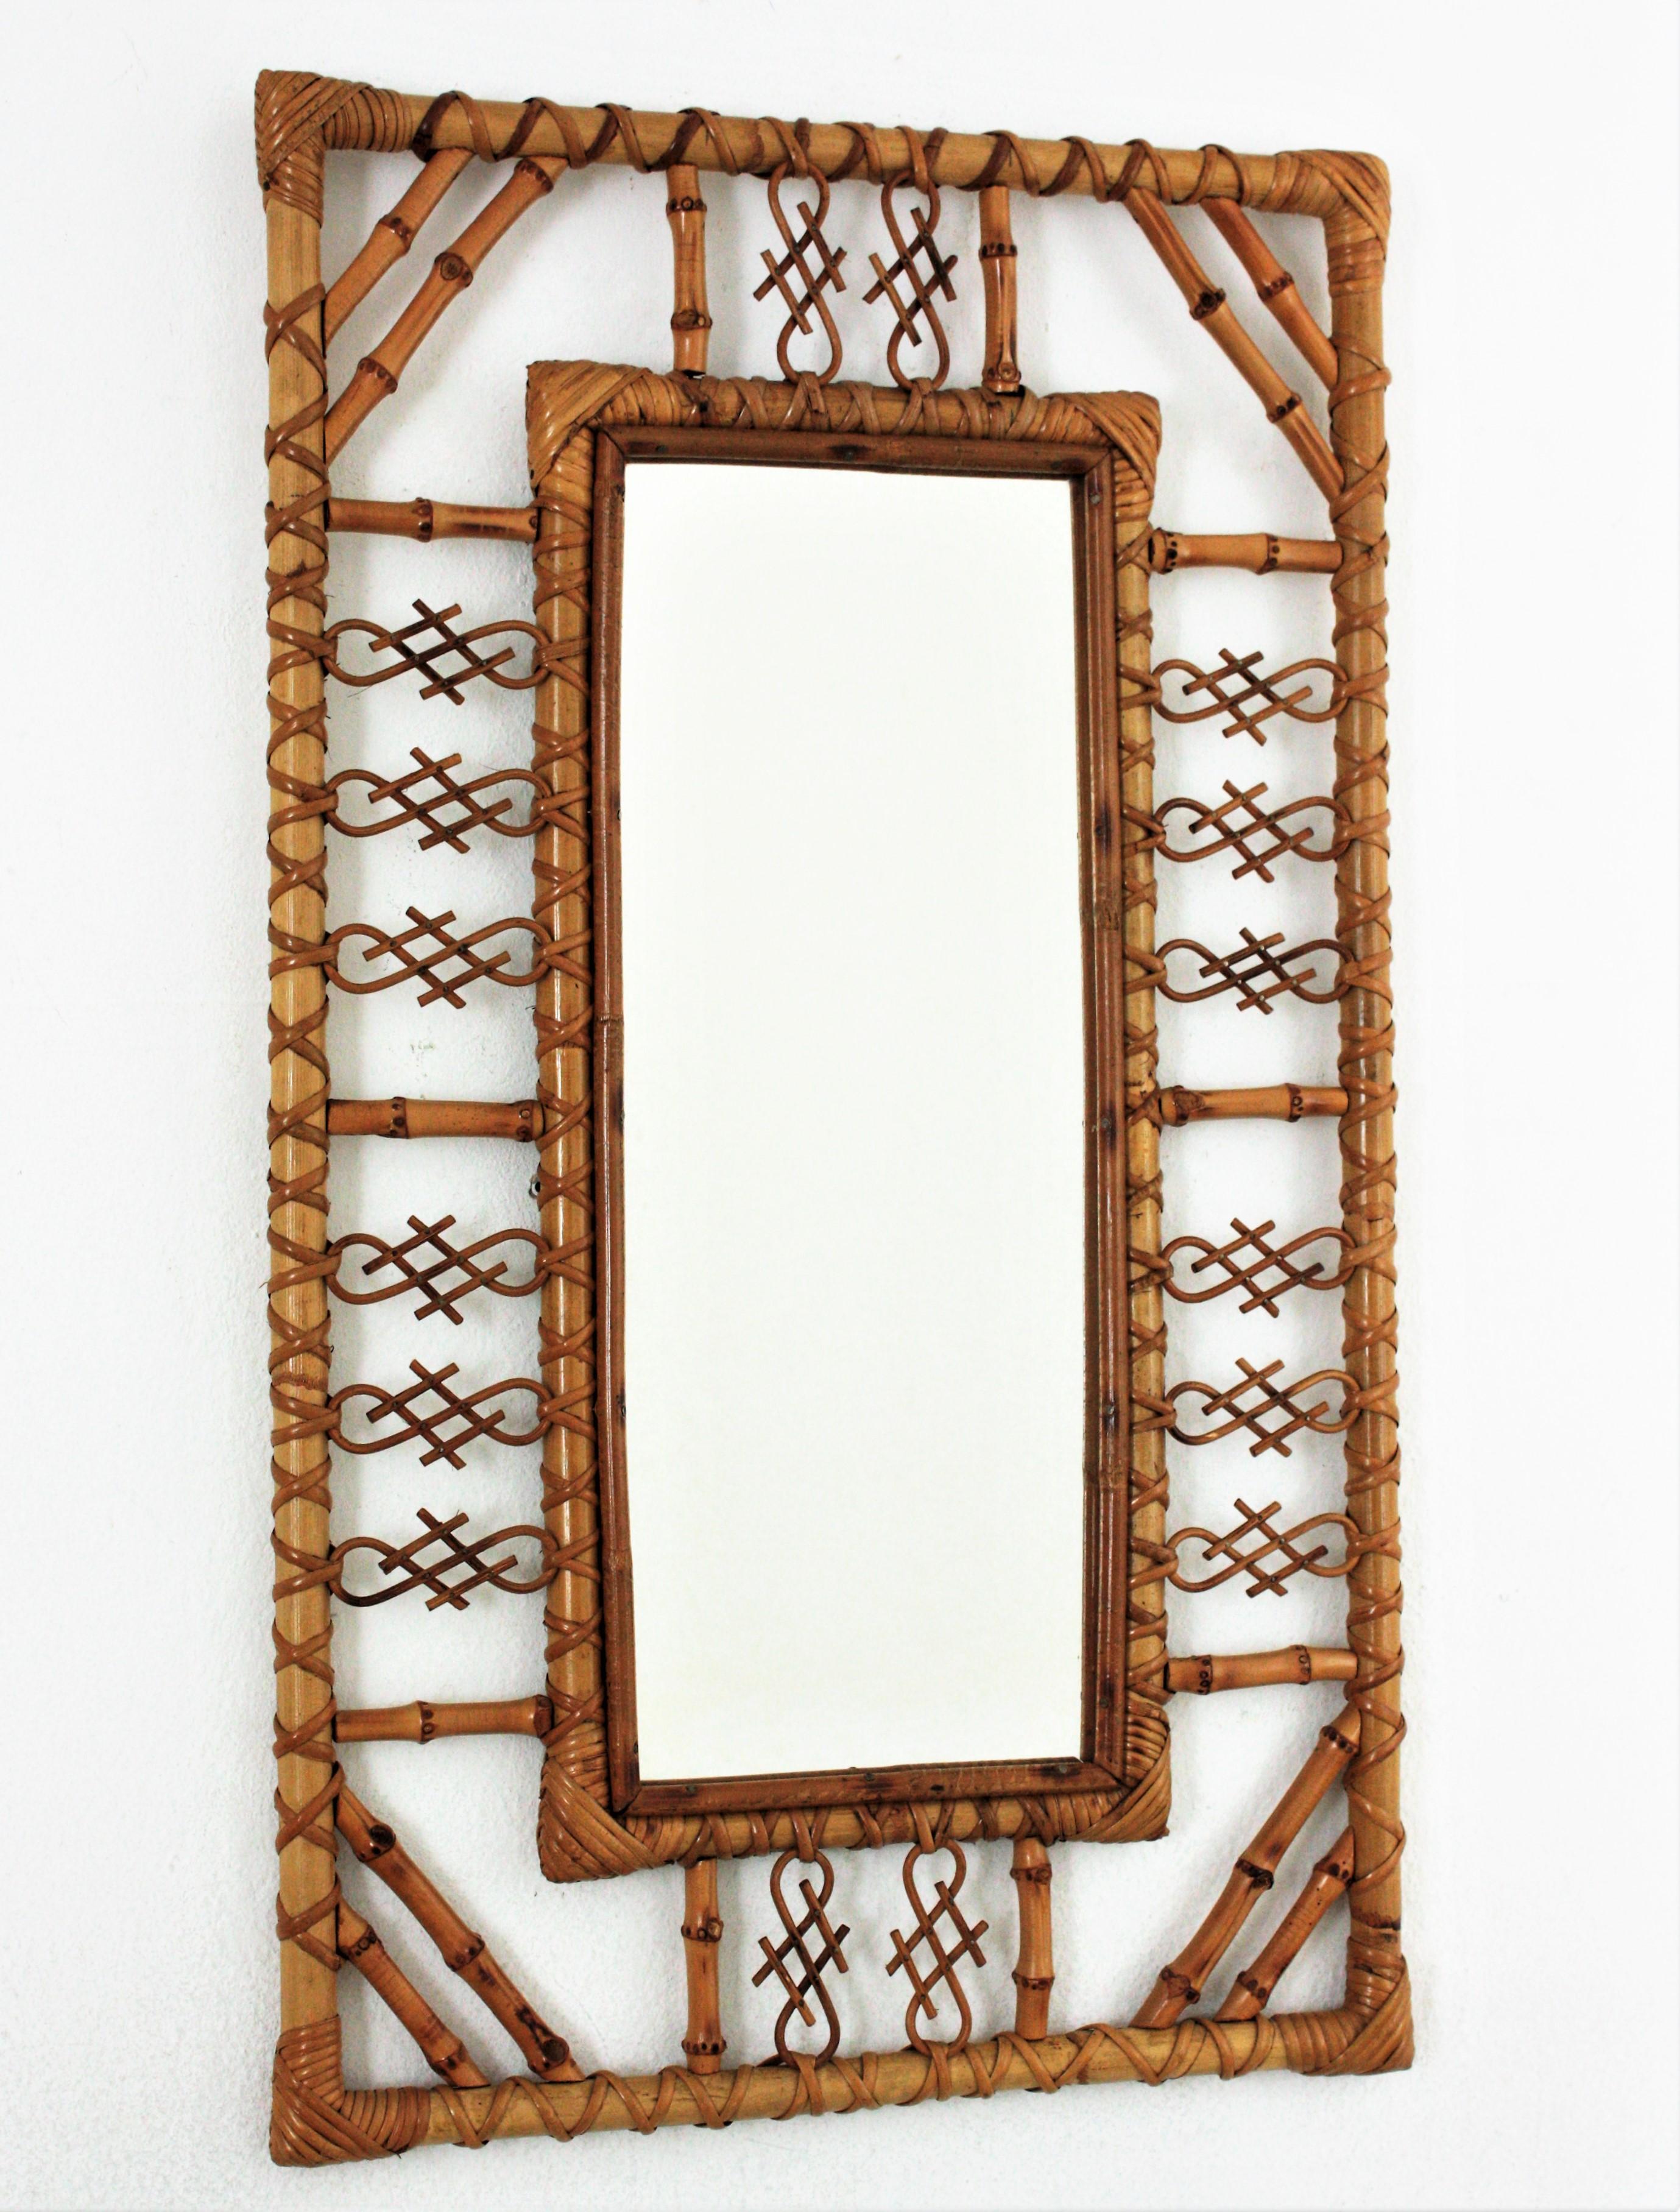 Midcentury rectangular mirror, rattan, bamboo. Spain, 1960s.
The mirror has chinoiserie and bamboo decorations on the frame and joining the corners.
It will be eye-catching in an entry hall, bathroom or bedroom and it will add a midcentury accent